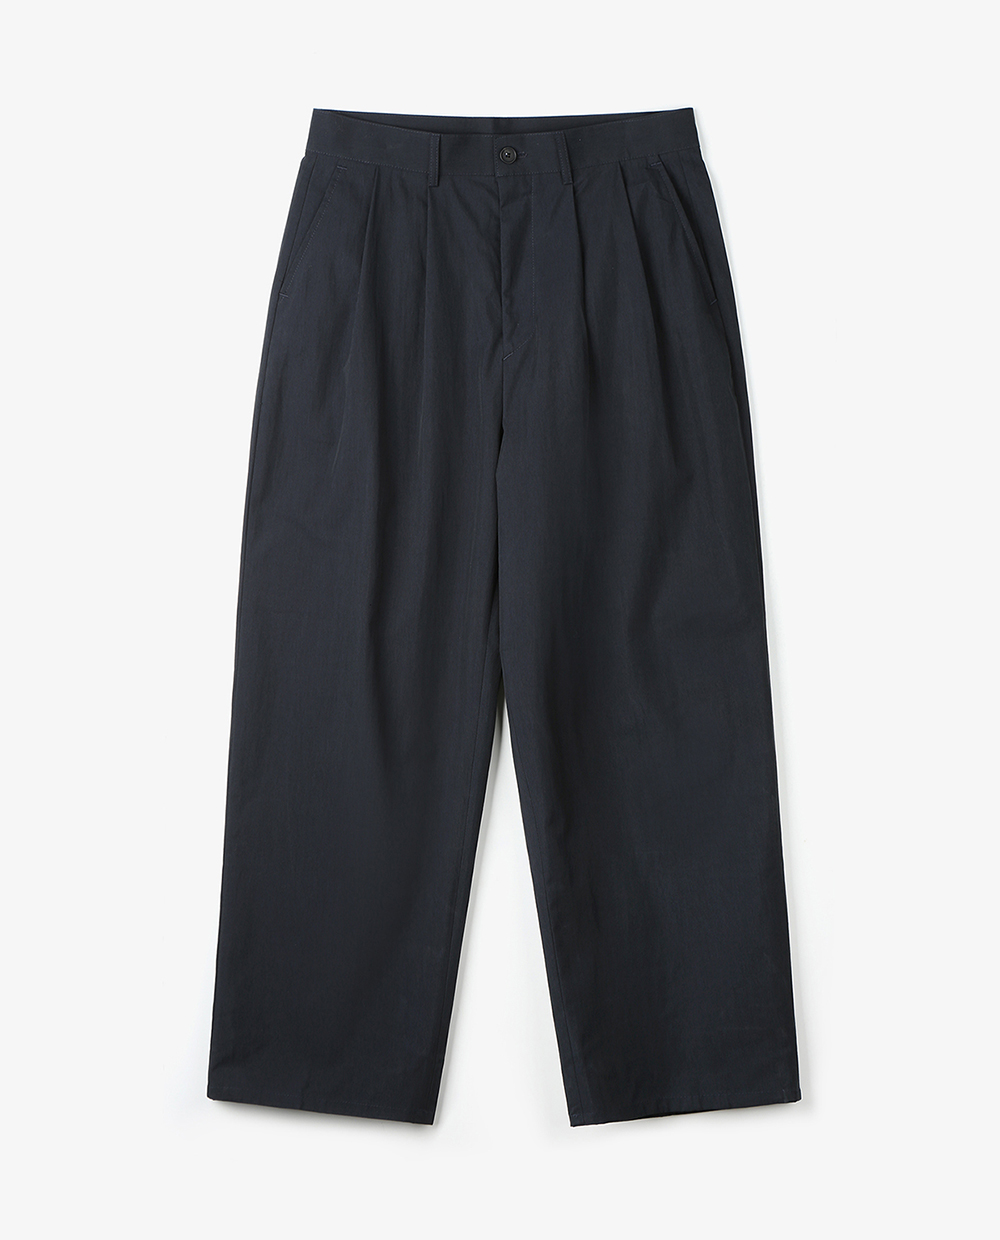 CN WIDE TWO TUCKED PANTS (NAVY)